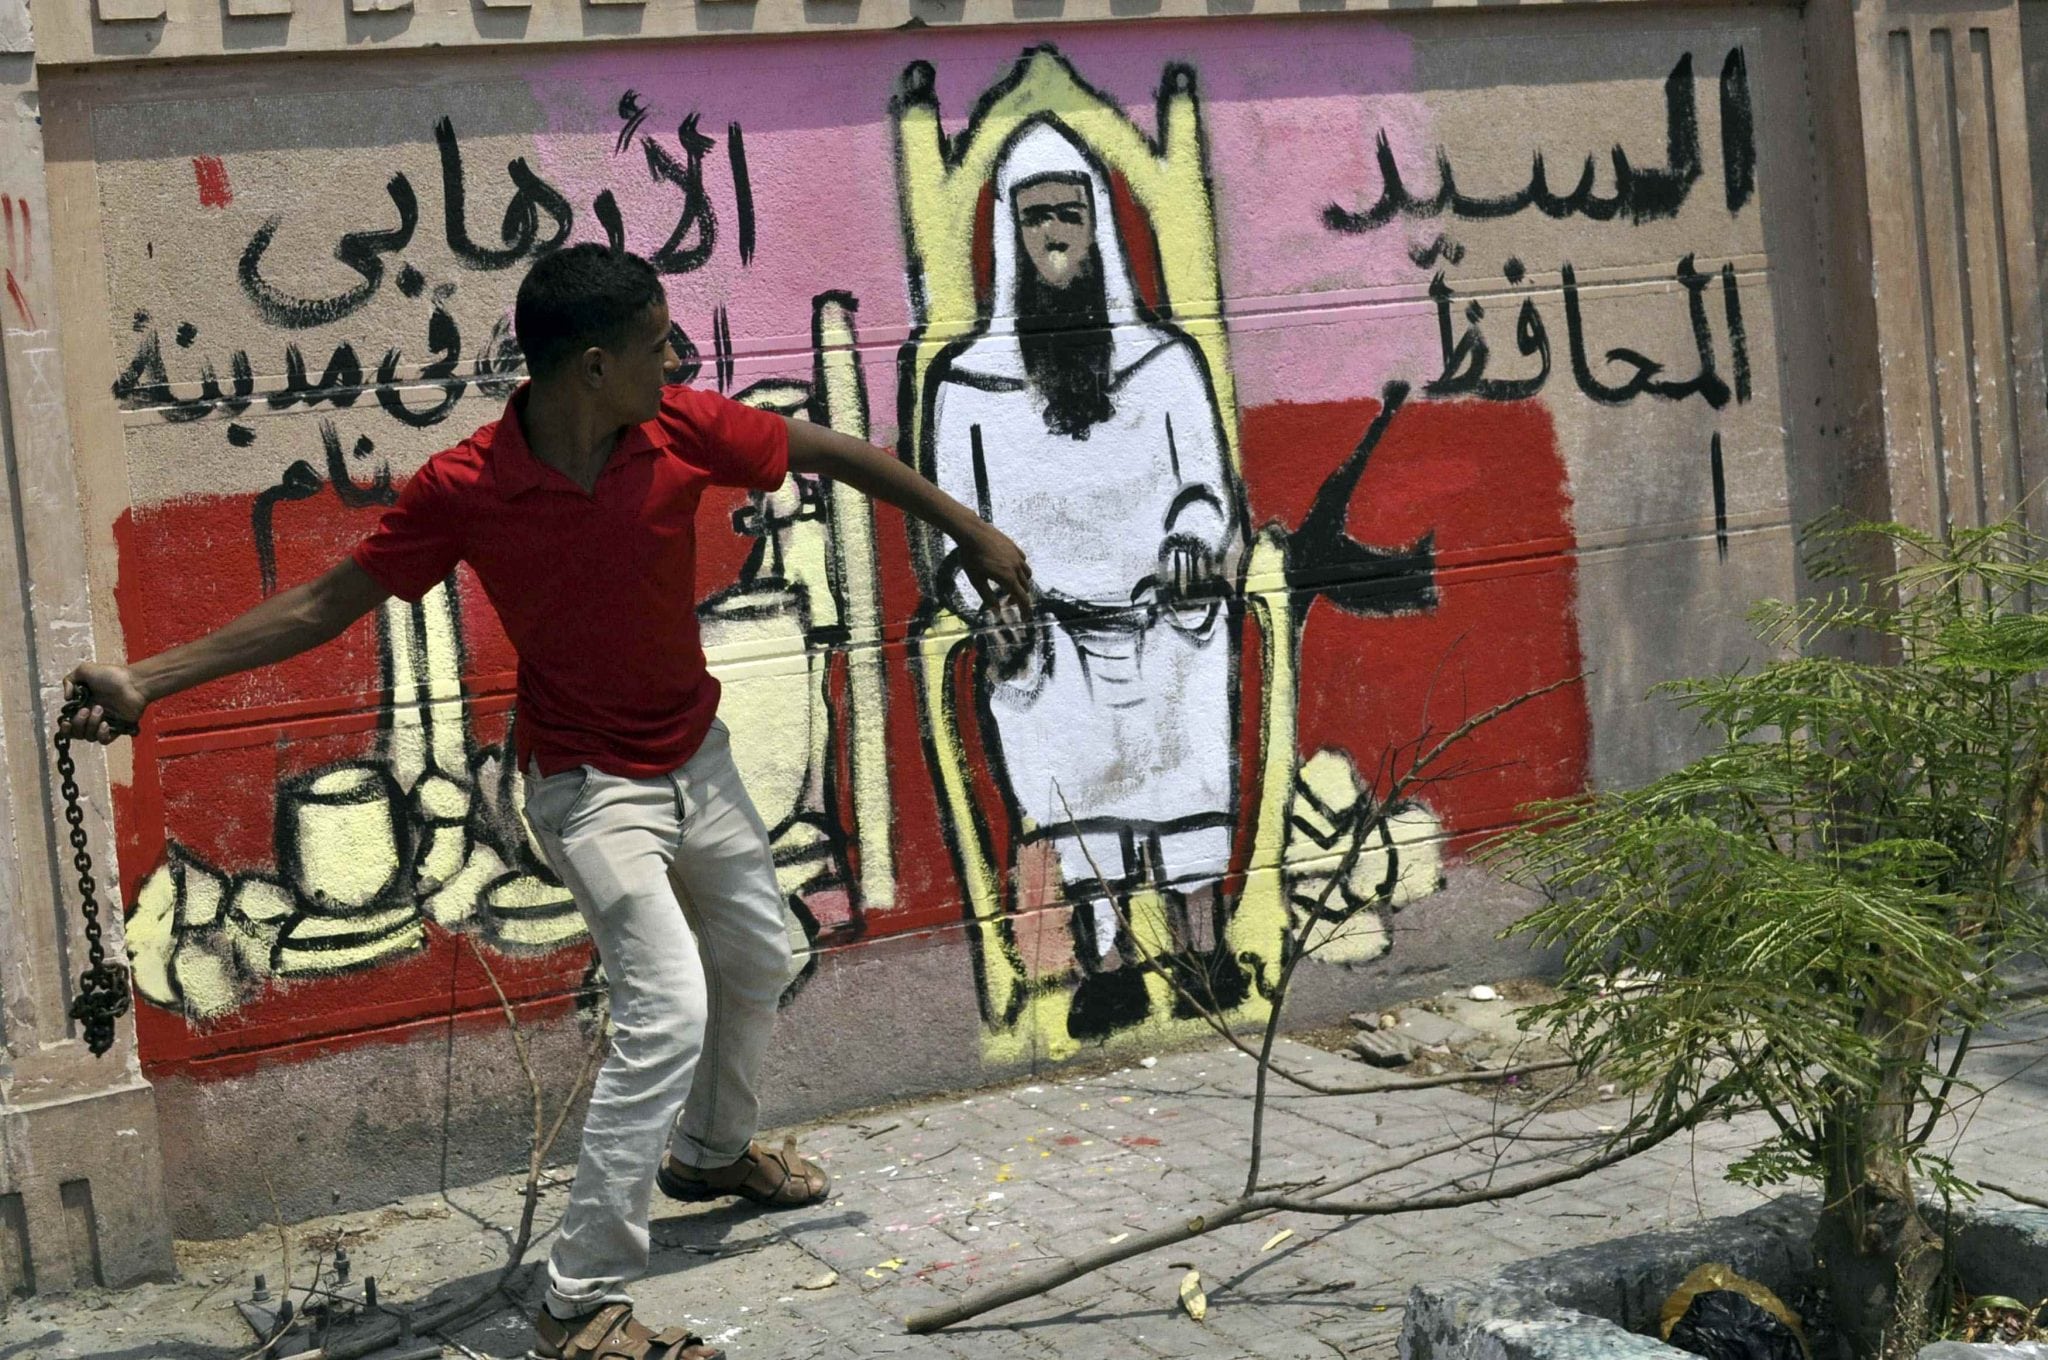 A protester throws a chain next to a graffiti on the wall depicting the newly appointed governor of Luxor Adel Mohamed al-Khayat, as a terrorist.